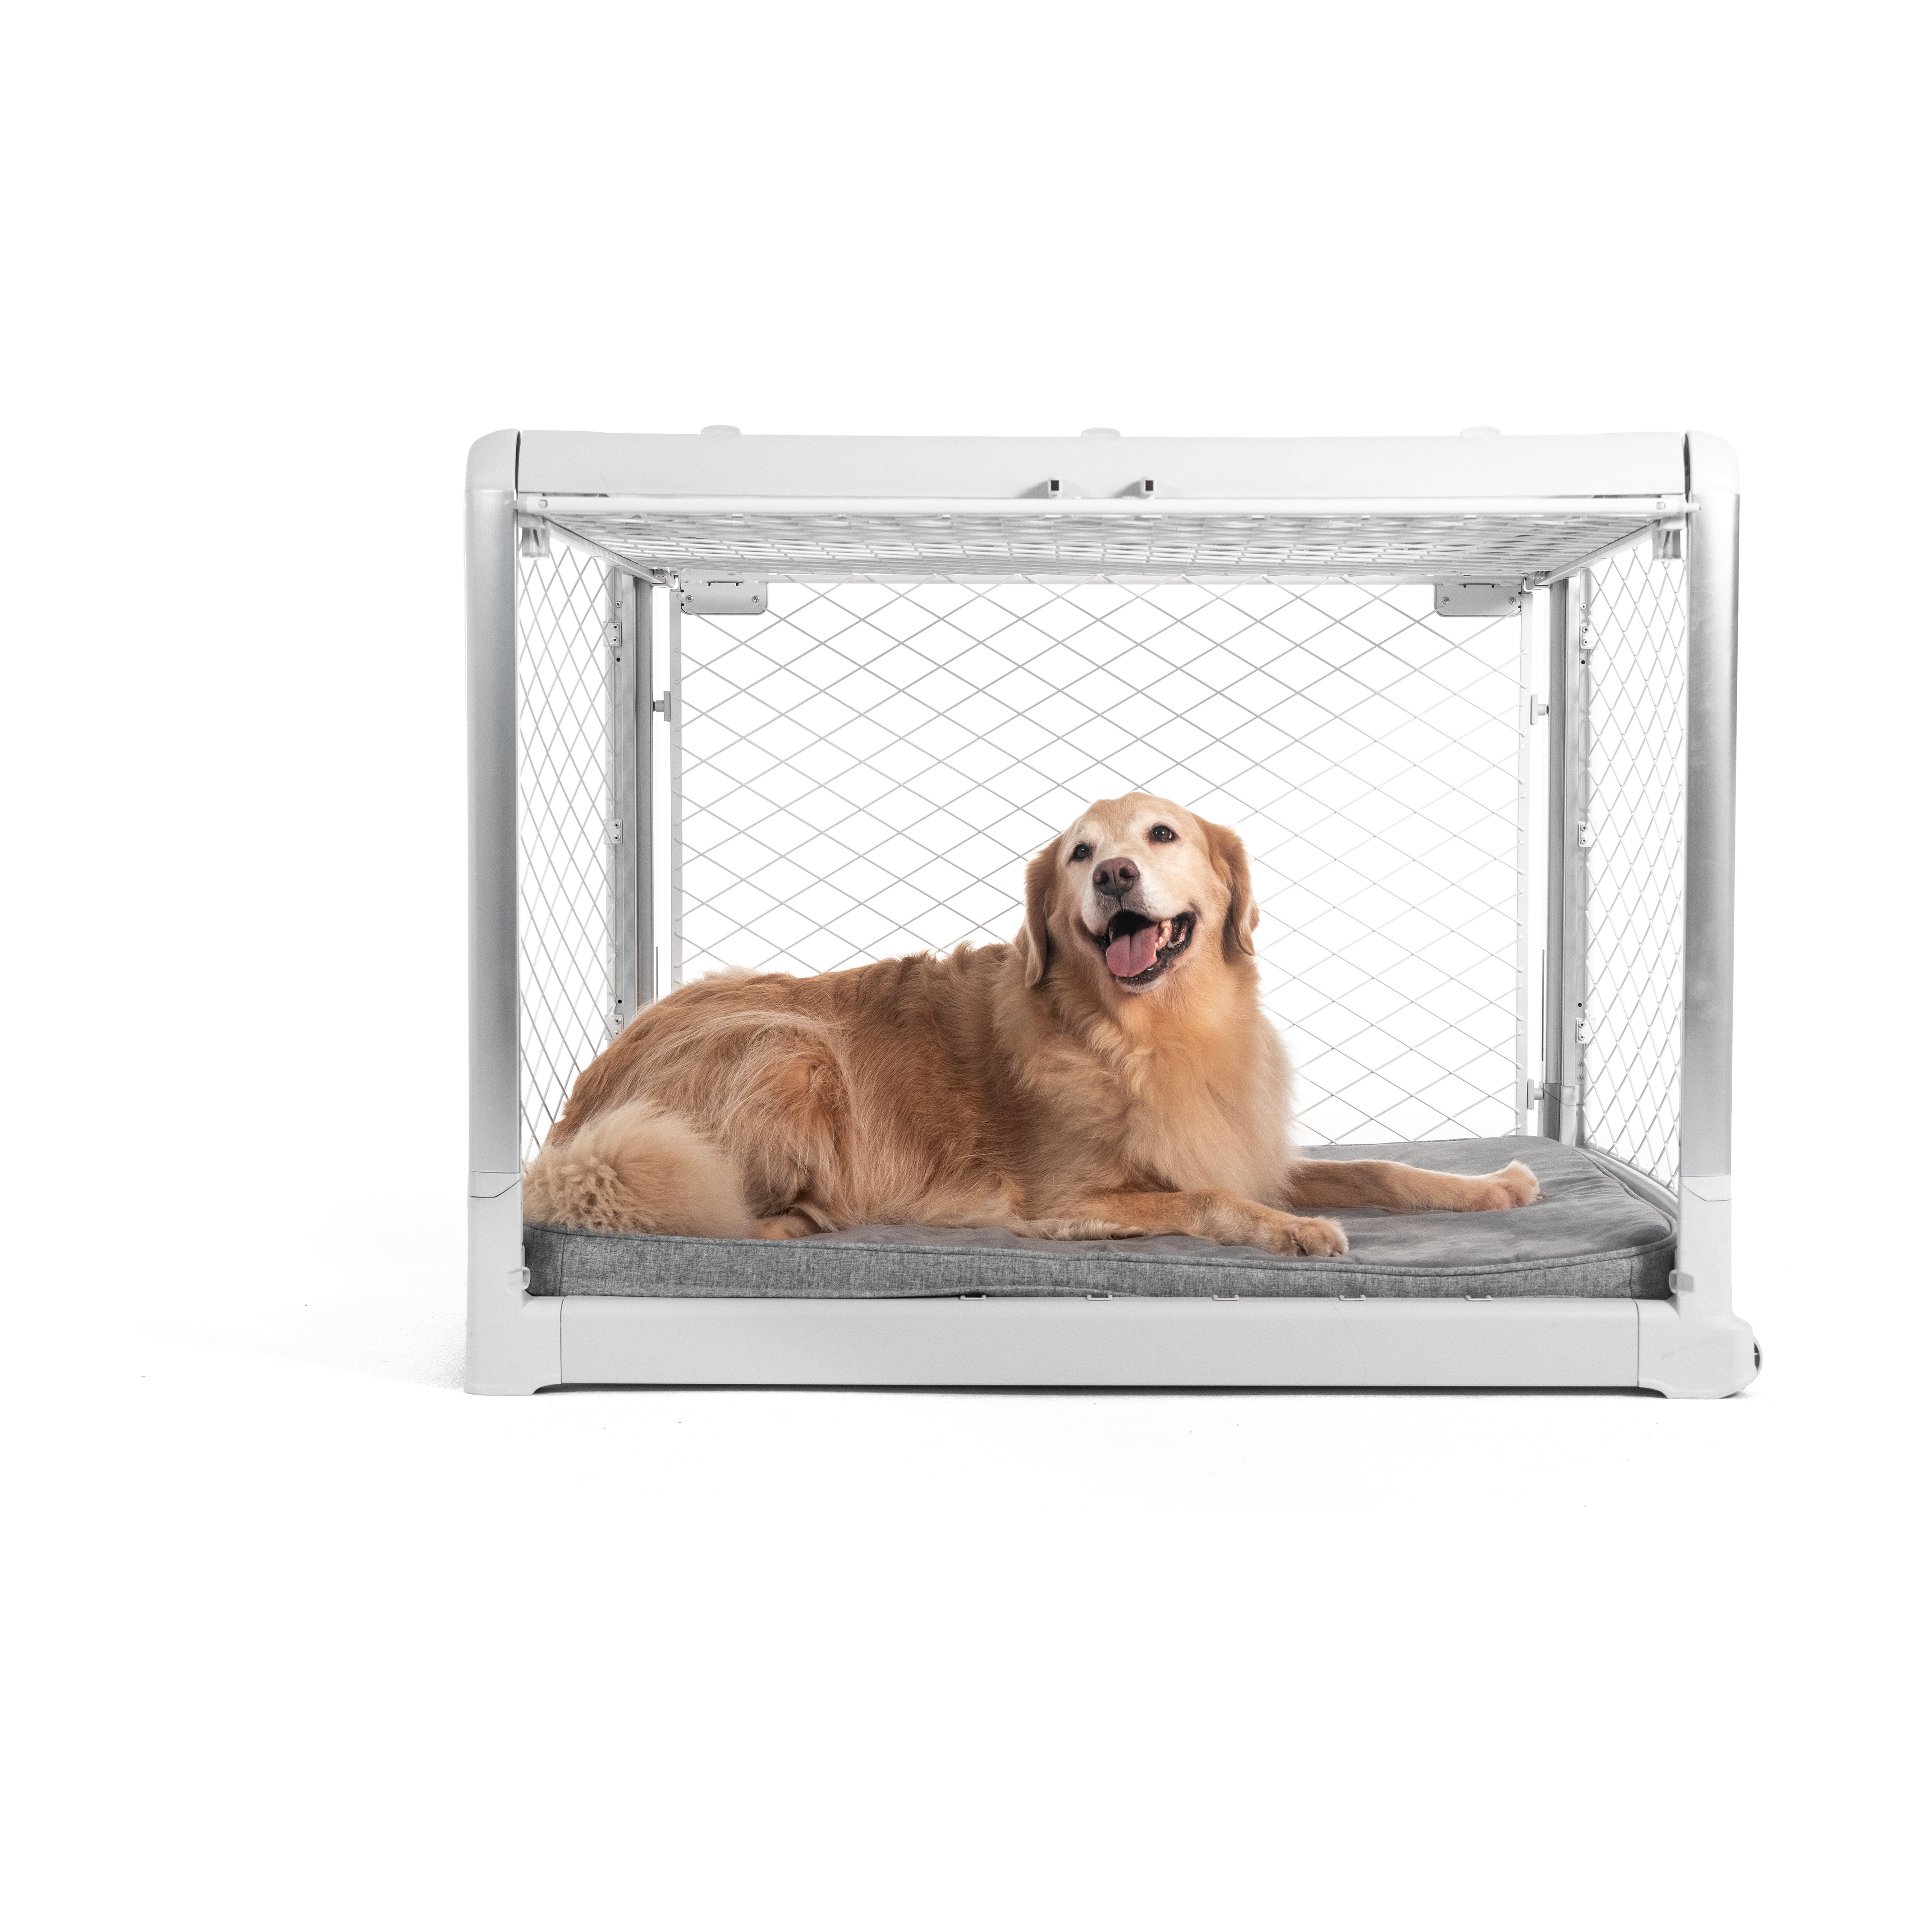 Diggs Revol Collapsible Dog Crate